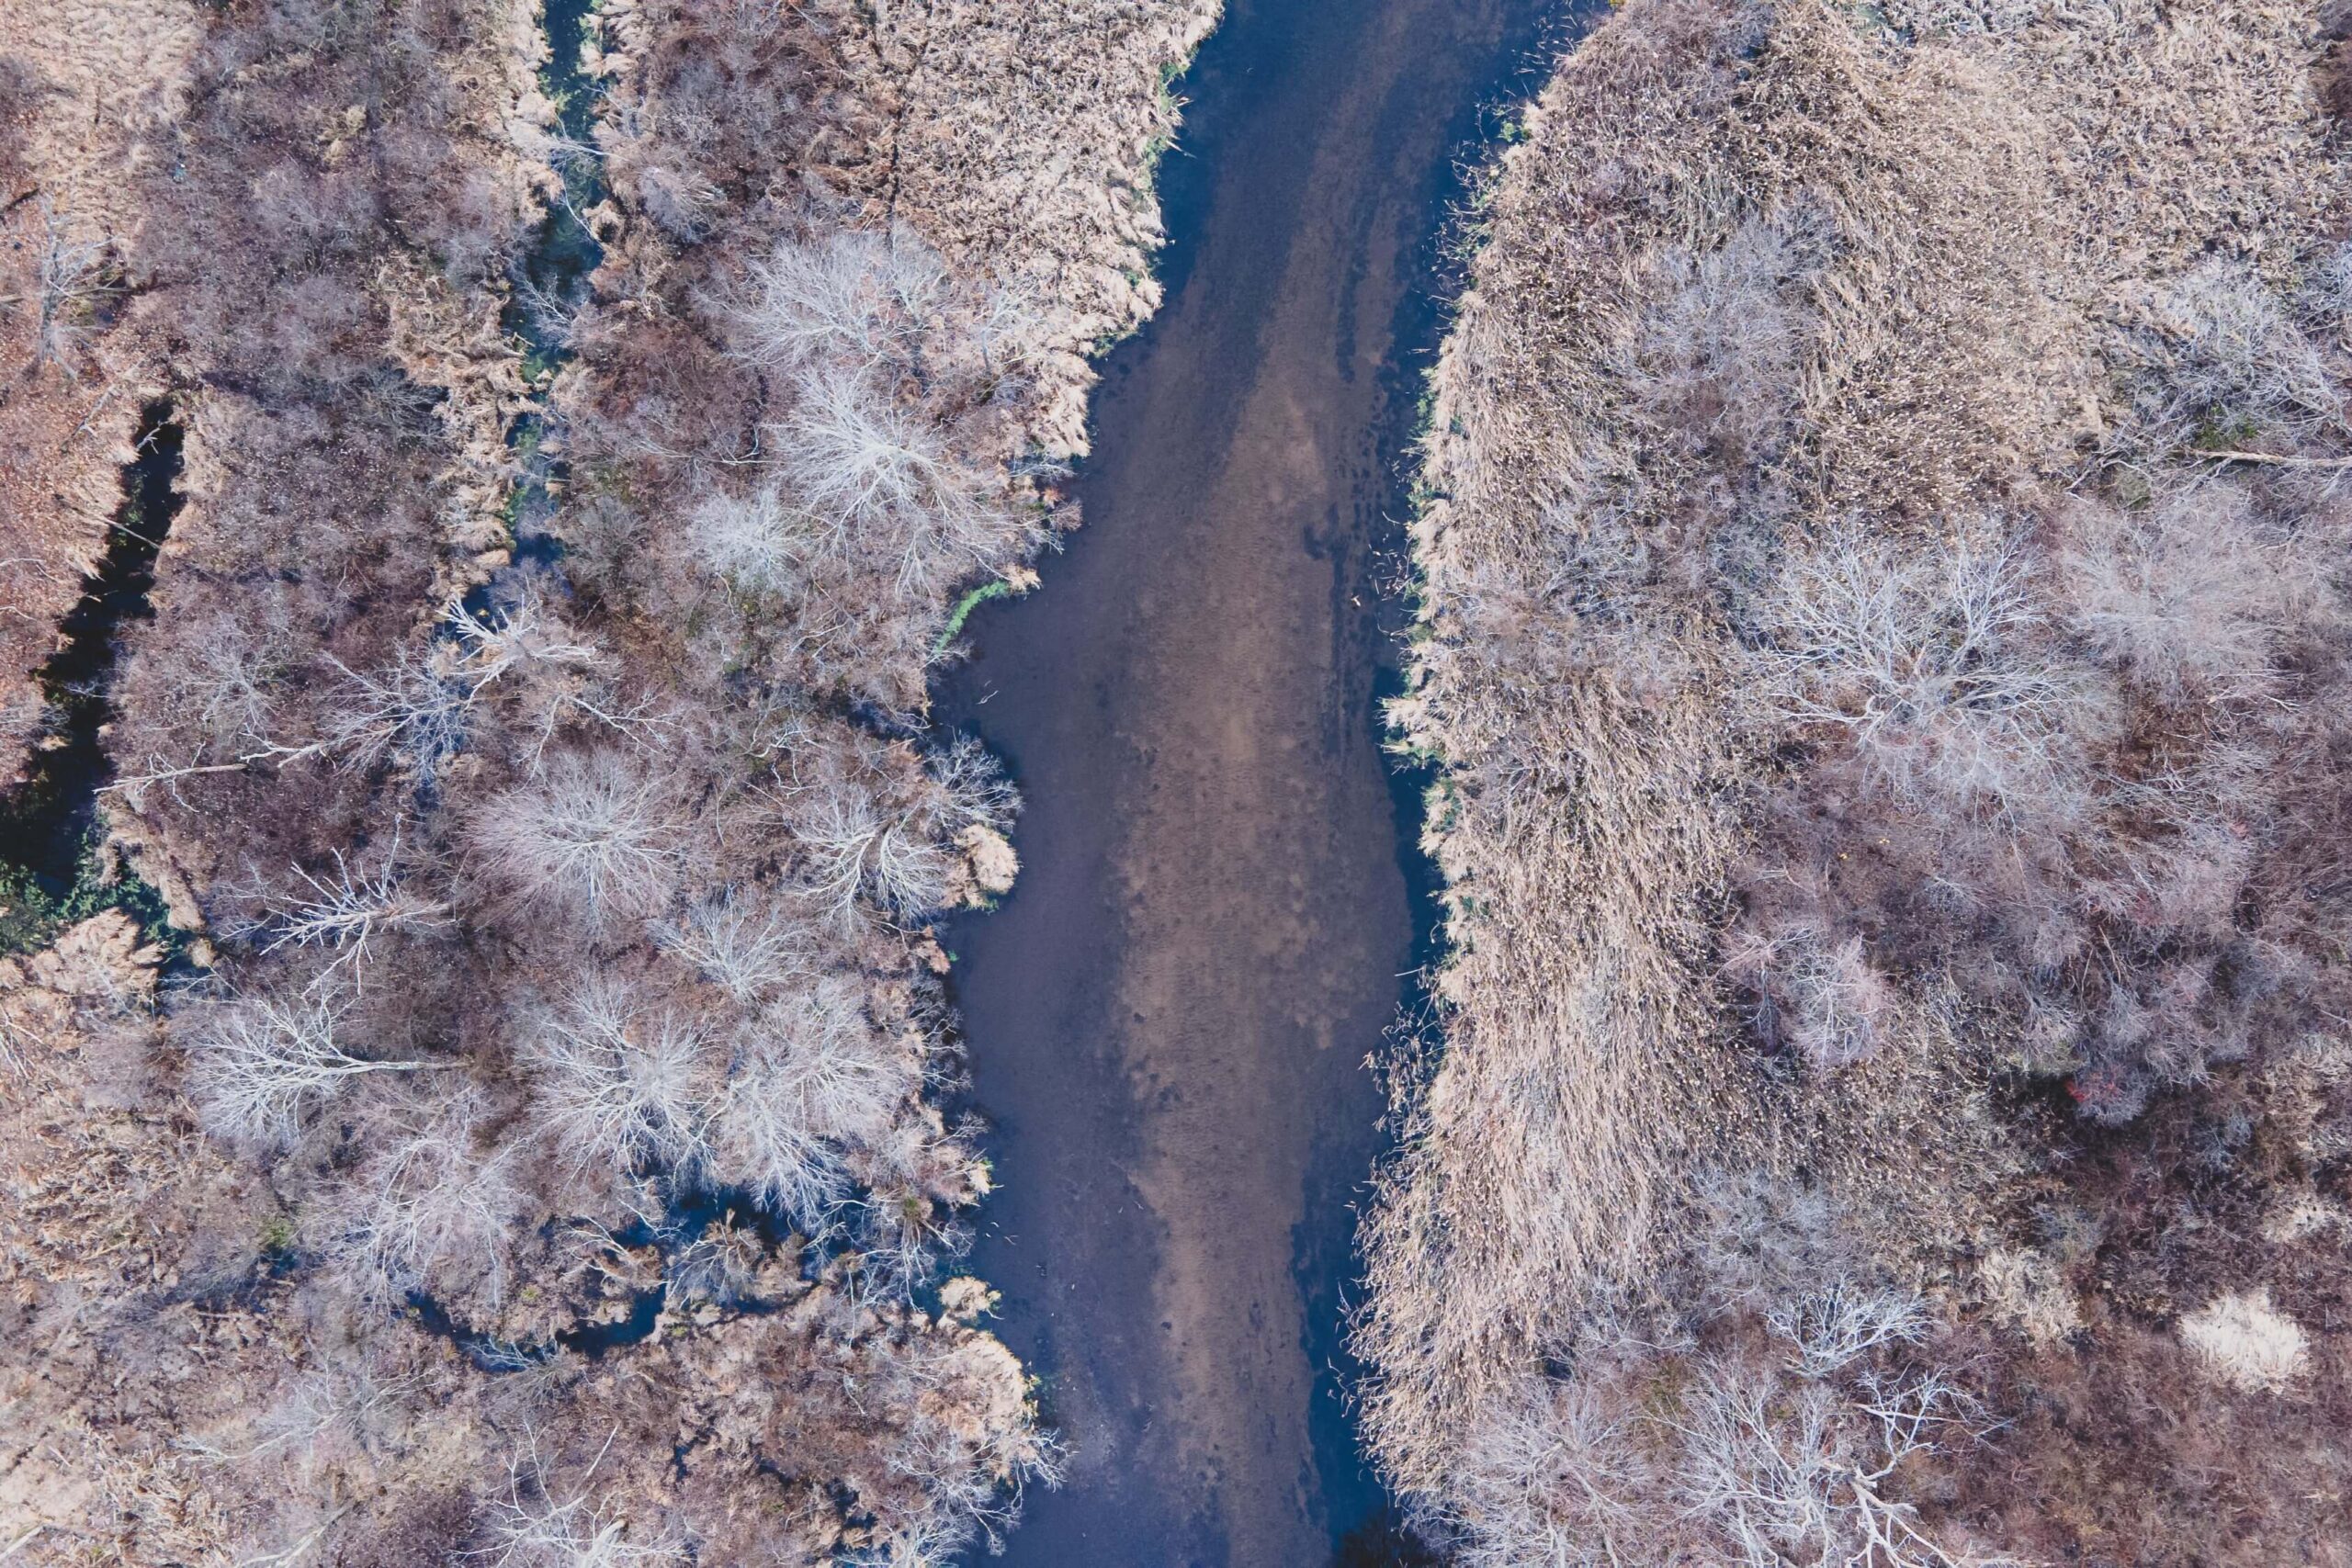 The Connecticut River viewed from above.